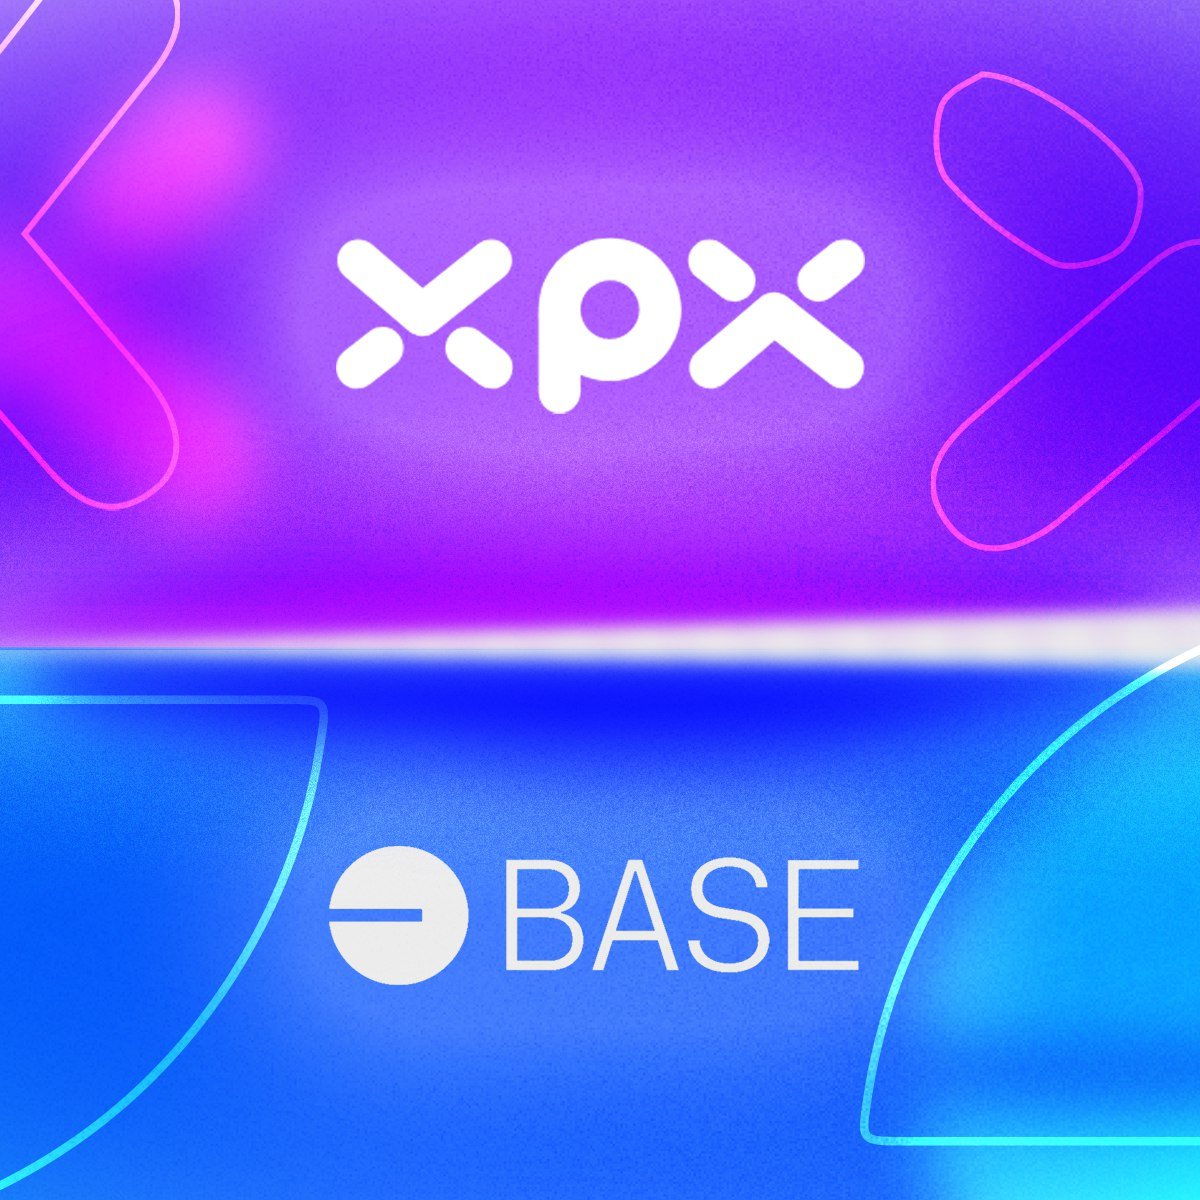 XPX token – The first off ramp solution on #SmartDeFi 

@XPXtoken Marks the Spot

With a focus on Real World Utility which will be the core components of XPX 🚀

XPXpay Solutions 💵
Web3 Marketplace🏬
Expo & Networking events🗣
NFTs with a twist 🕶
Built on a strong community🤝